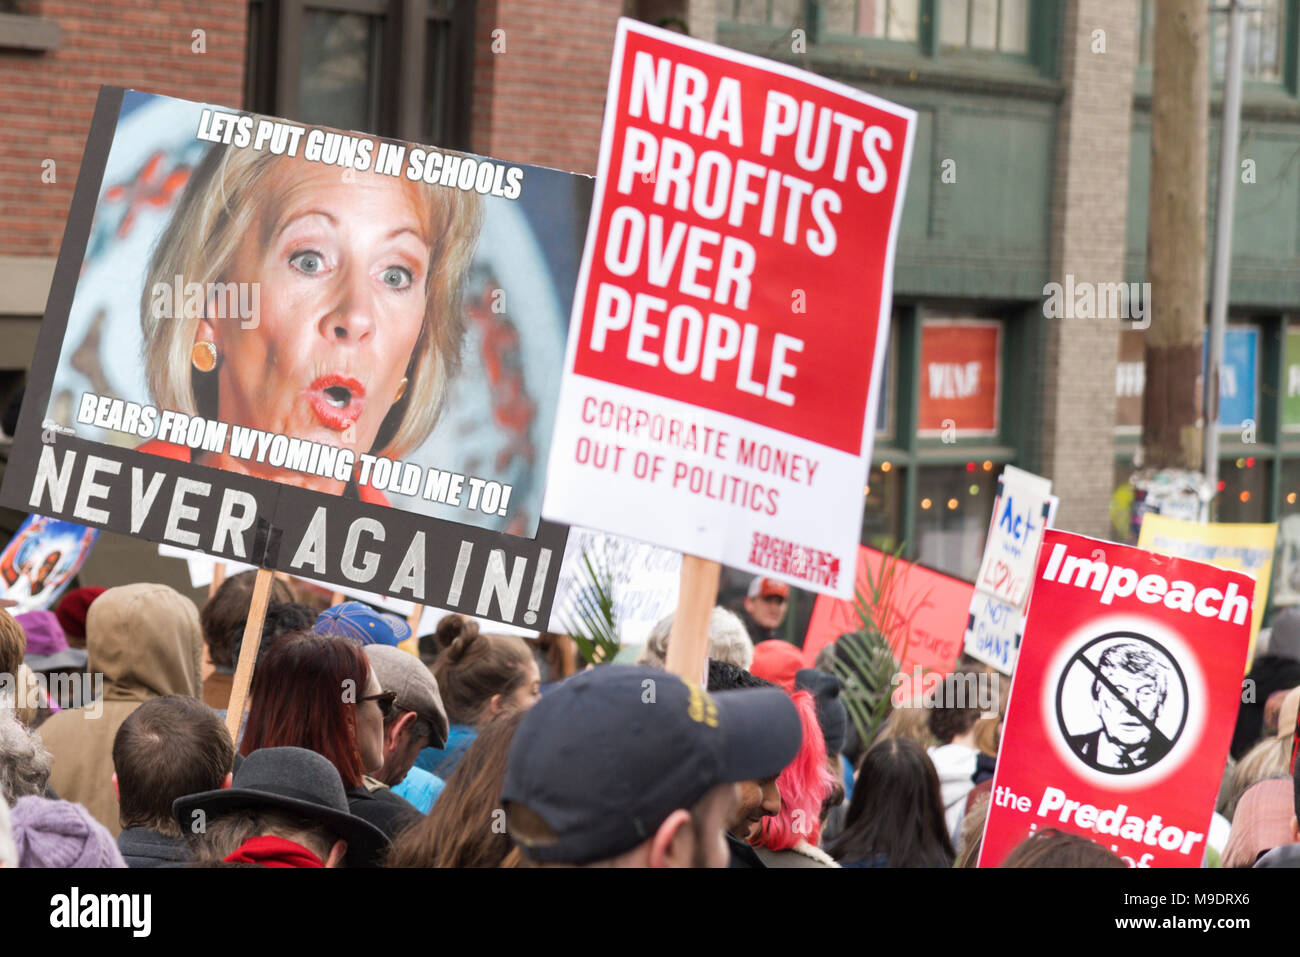 Seattle Washington, March 24th 2018 The March for our Lives rally with many students, children, youth, kids, families, sign with Betsy Devos. Stock Photo